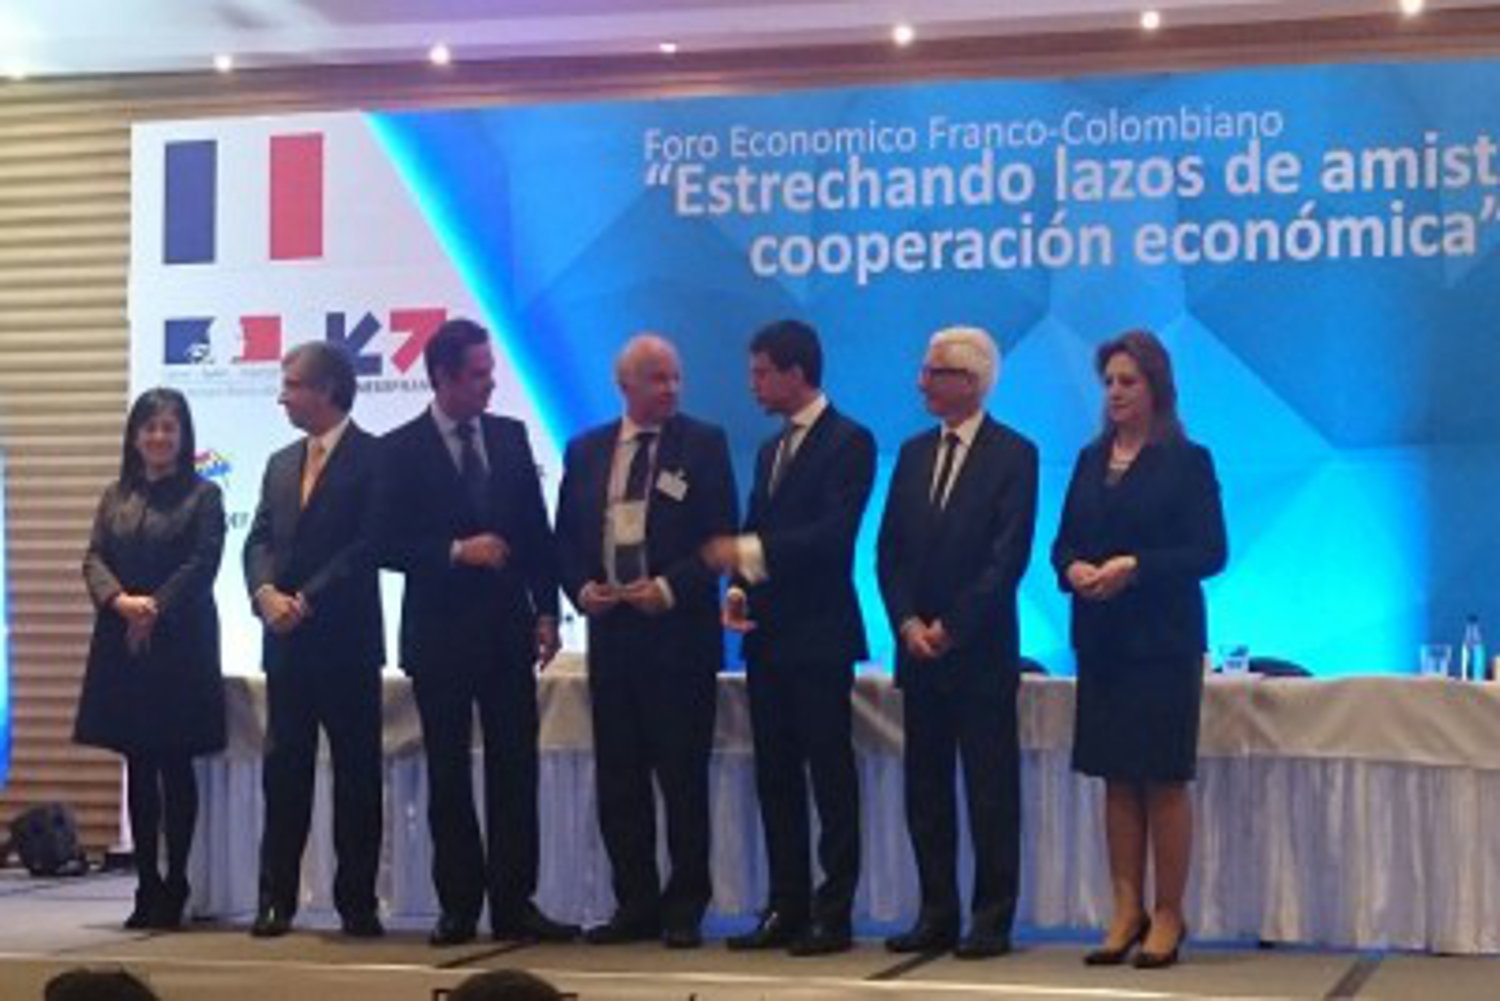 Star Award for exporting in Colombia